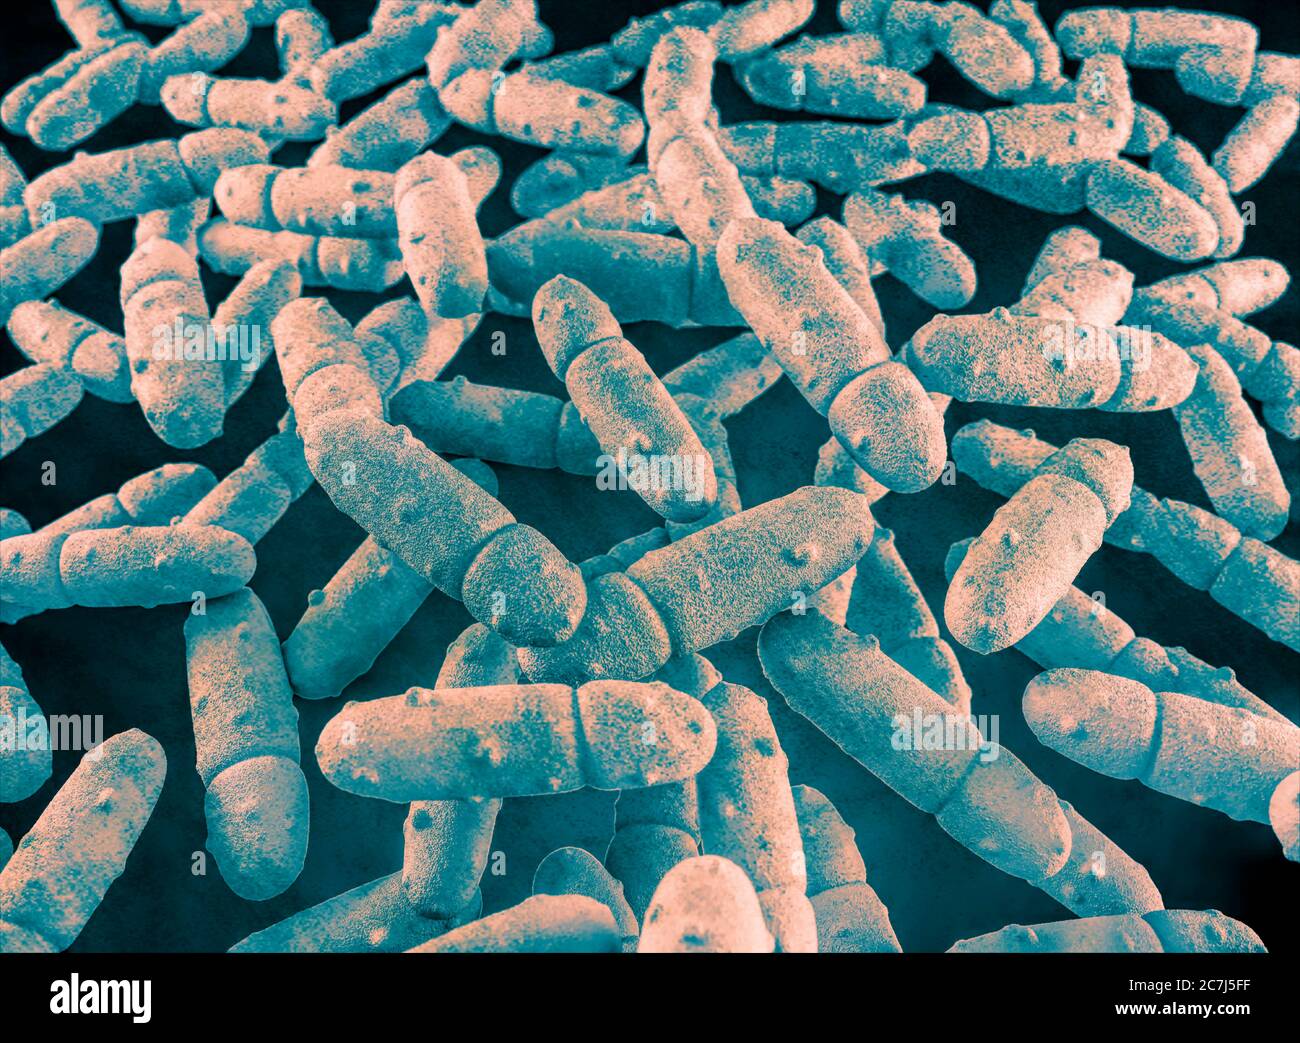 Illustration of Klebsiella pneumoniae bacteria. K. pneumoniae are Gram-negative, encapsulated, non-motile, enteric, rod-shaped bacteria. This species causes Friedlander's pneumonia and urinary tract infections. Stock Photo